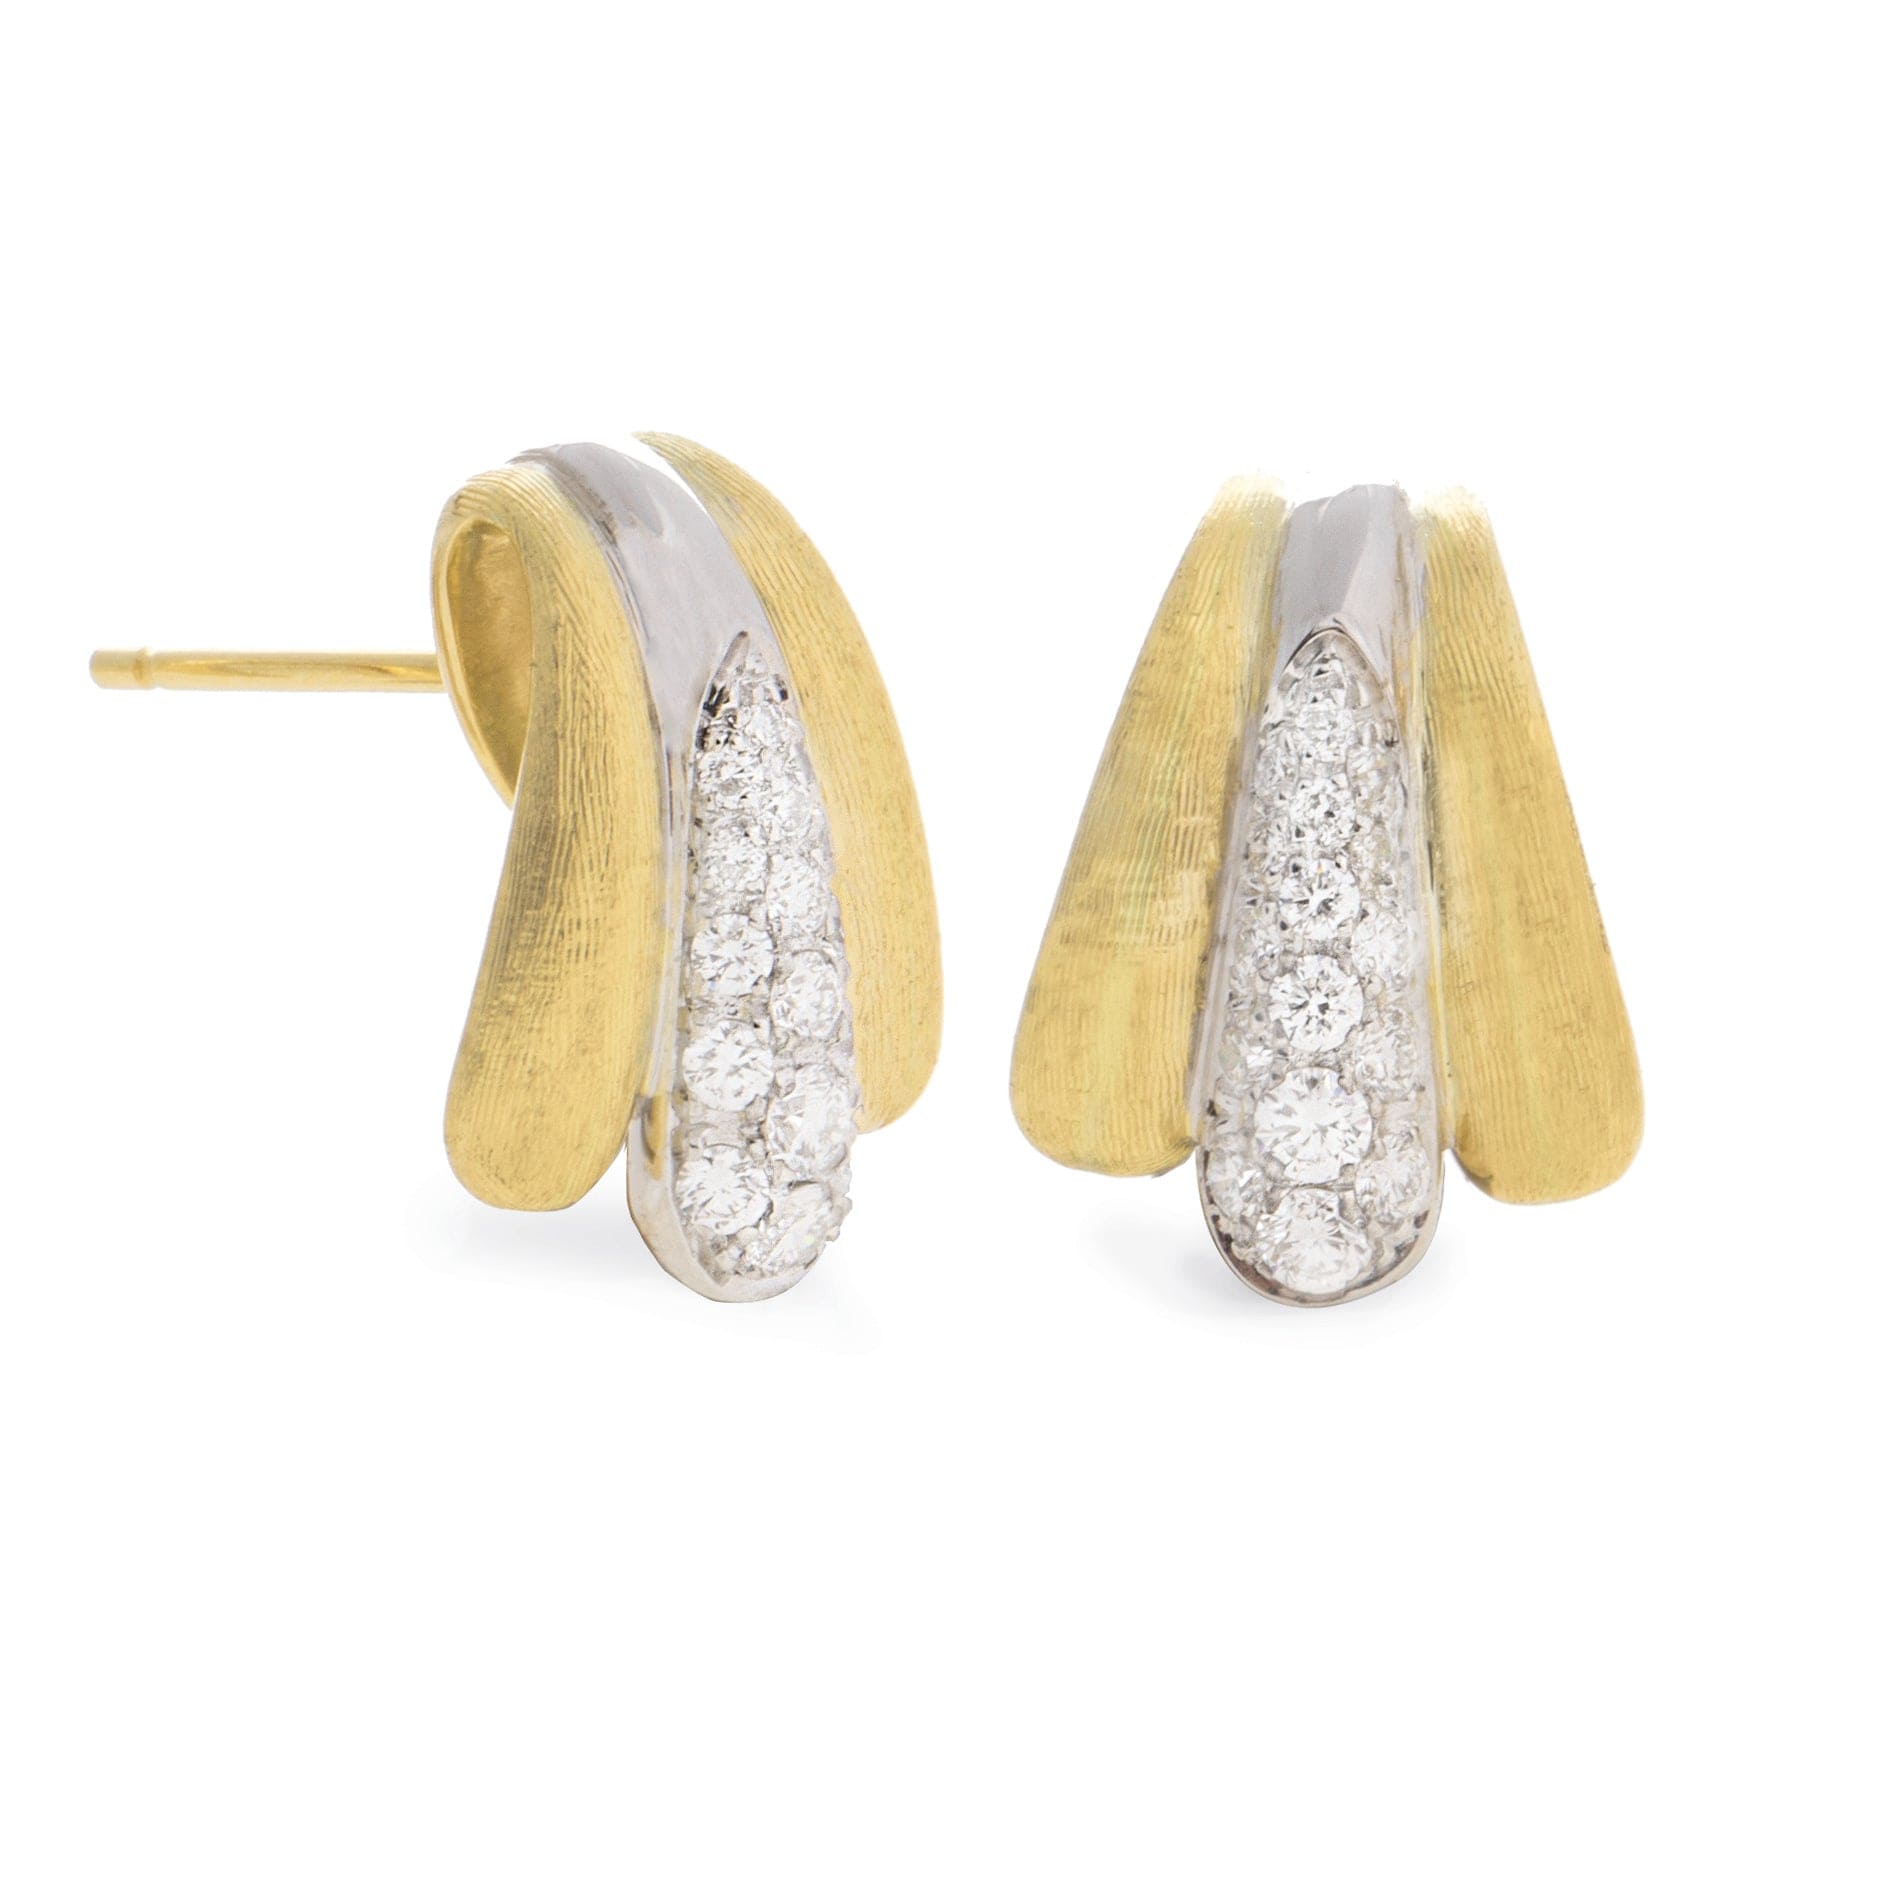 Marco Bicego Lucia 18K Yellow and White Gold and Diamond Earrings